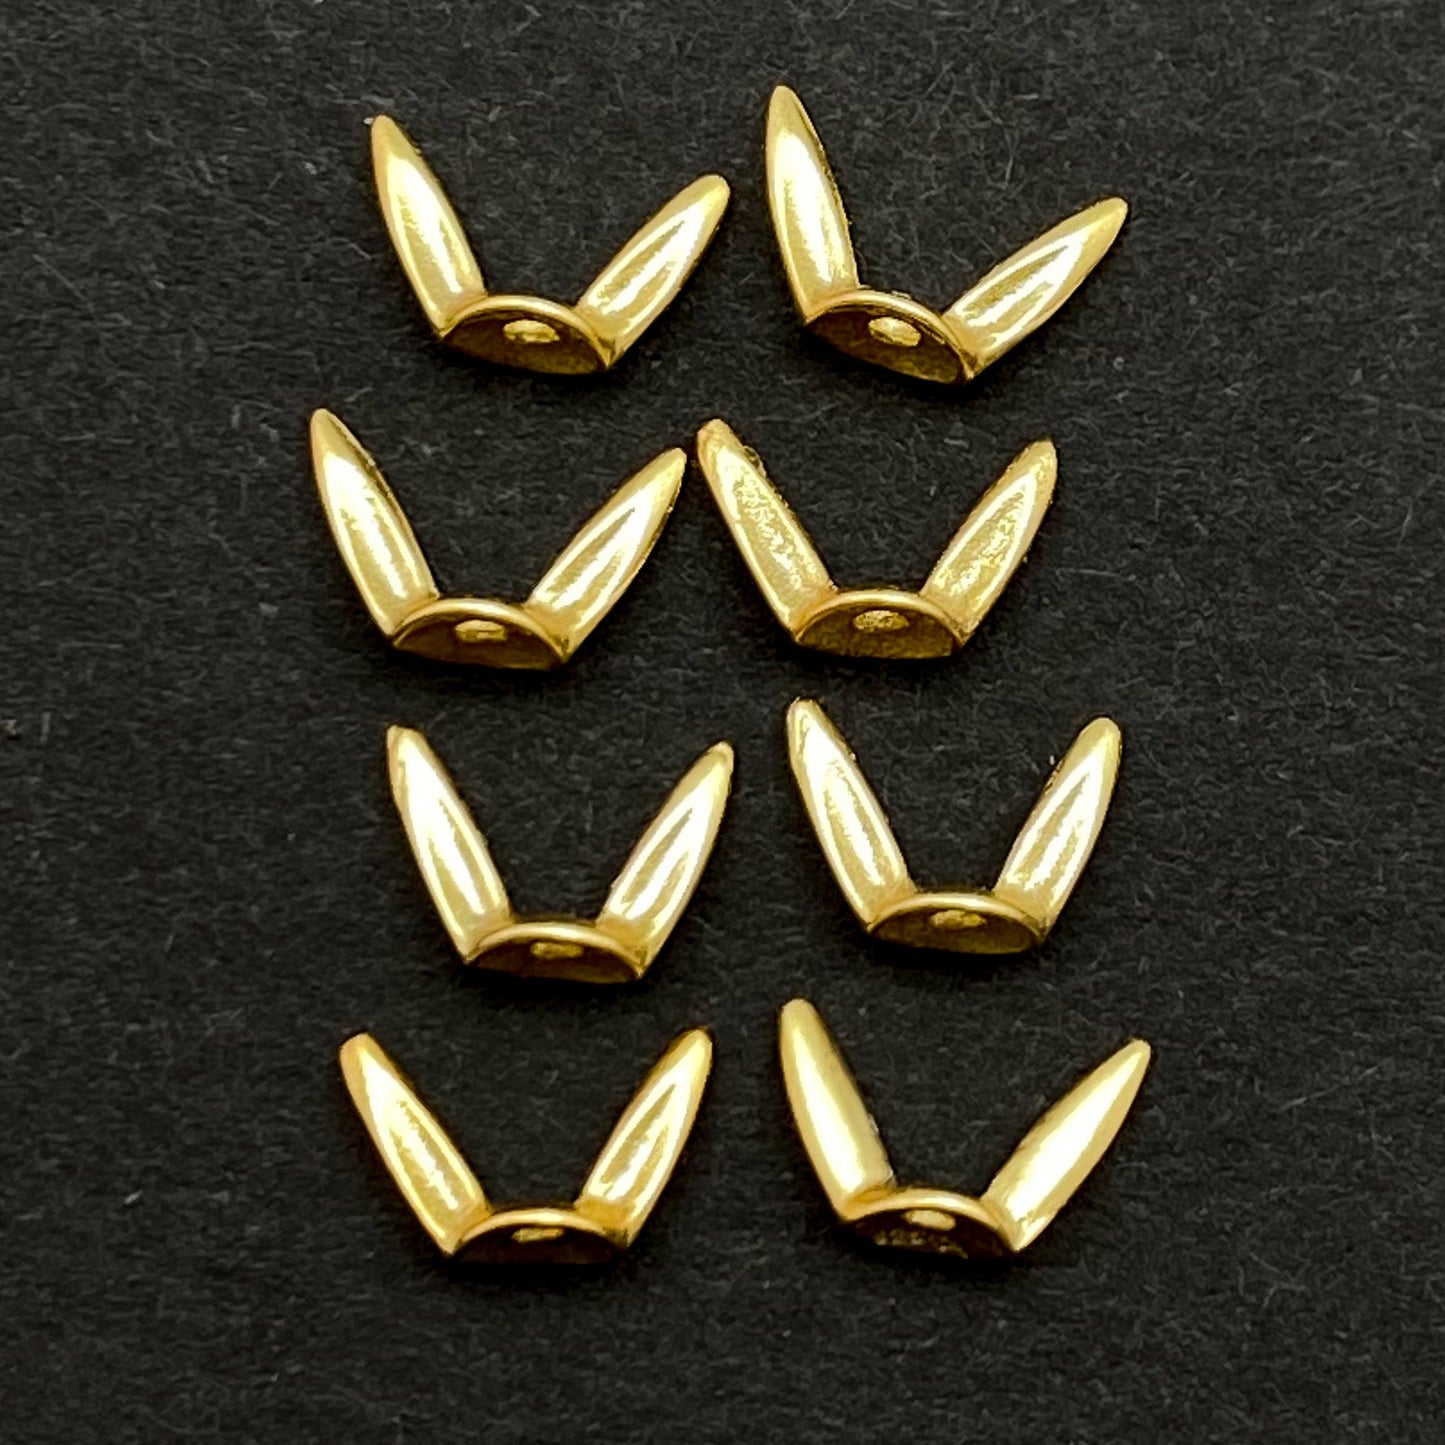 Bunny Ears Bead Cap (Gold Plated Sterling Silver) - 1 pc.